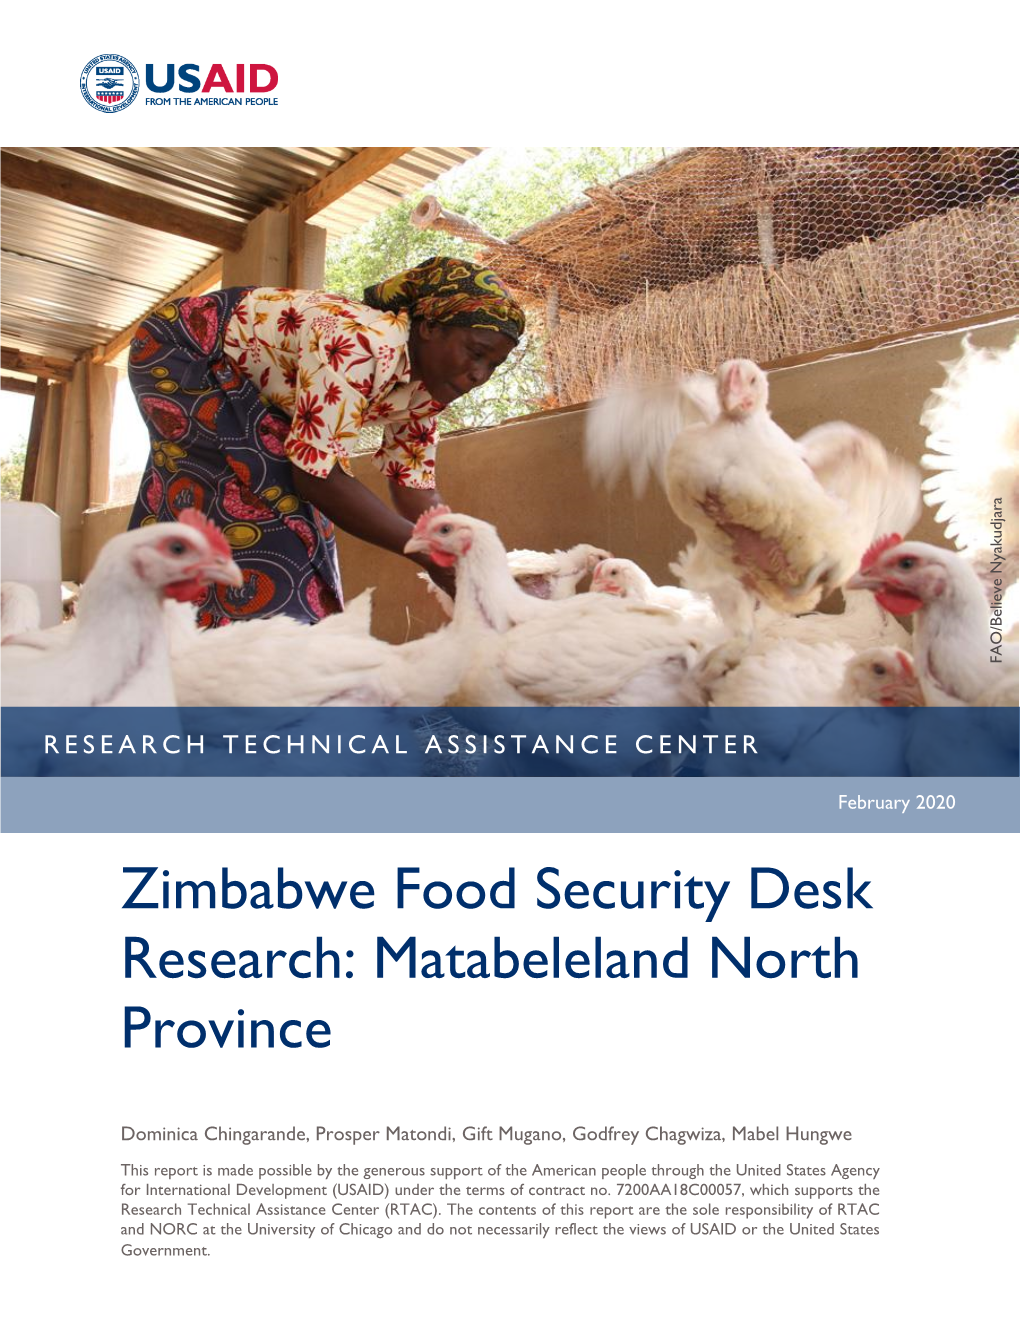 Zimbabwe Food Security Desk Research: Matabeleland North Province